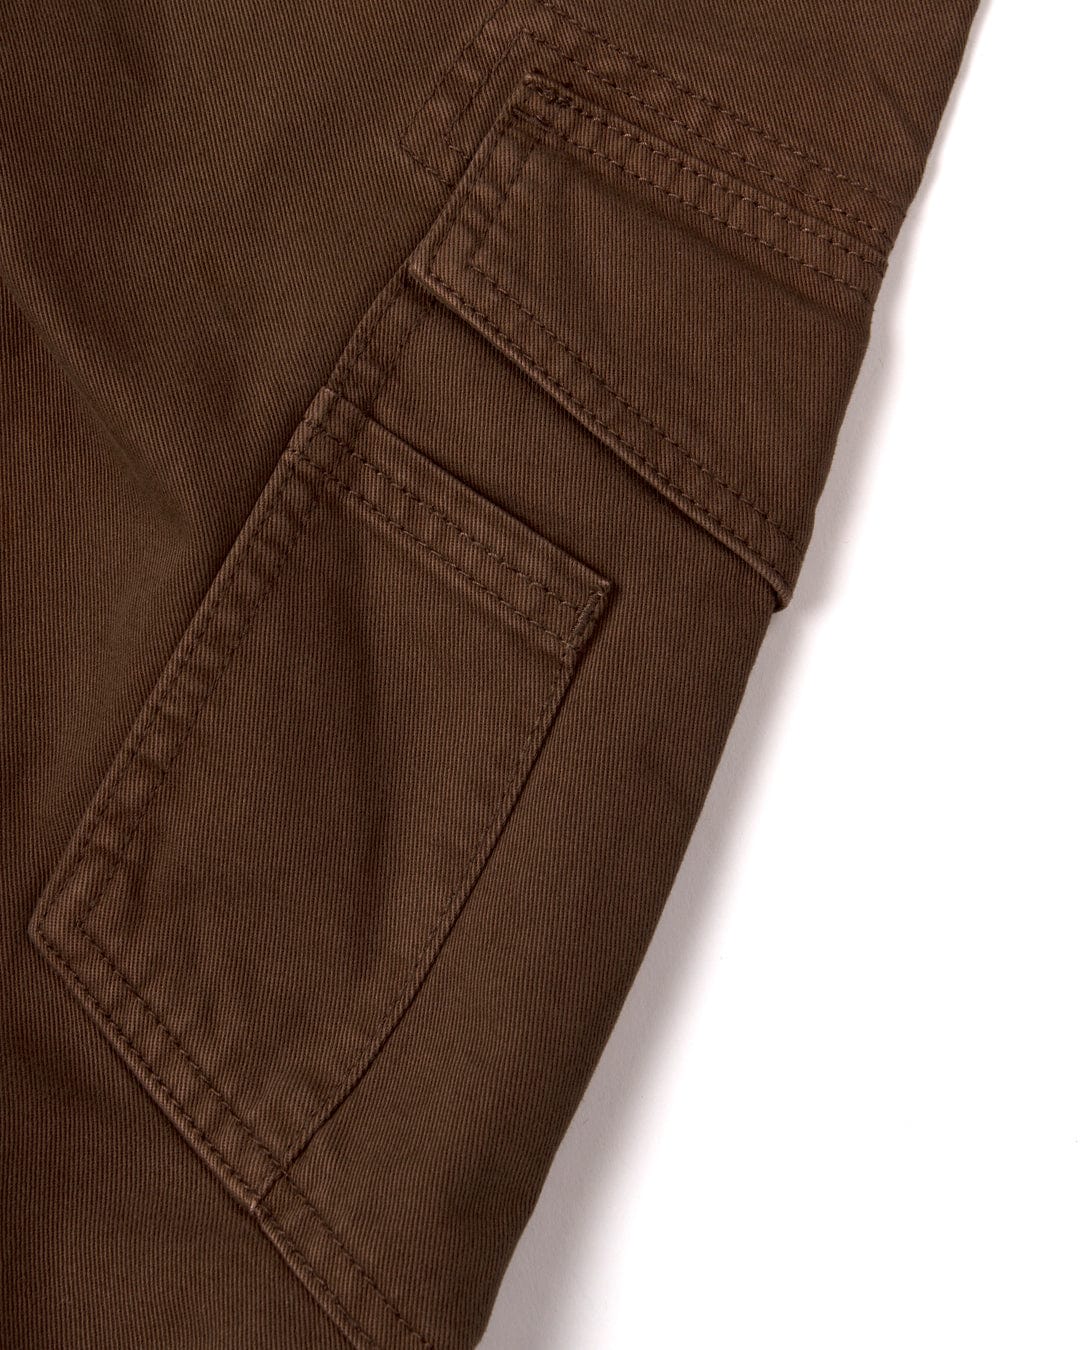 Close-up view of a Saltrock Godrevy 2 - Mens Cargo Trousers - Brown pocket detailing on a white background.